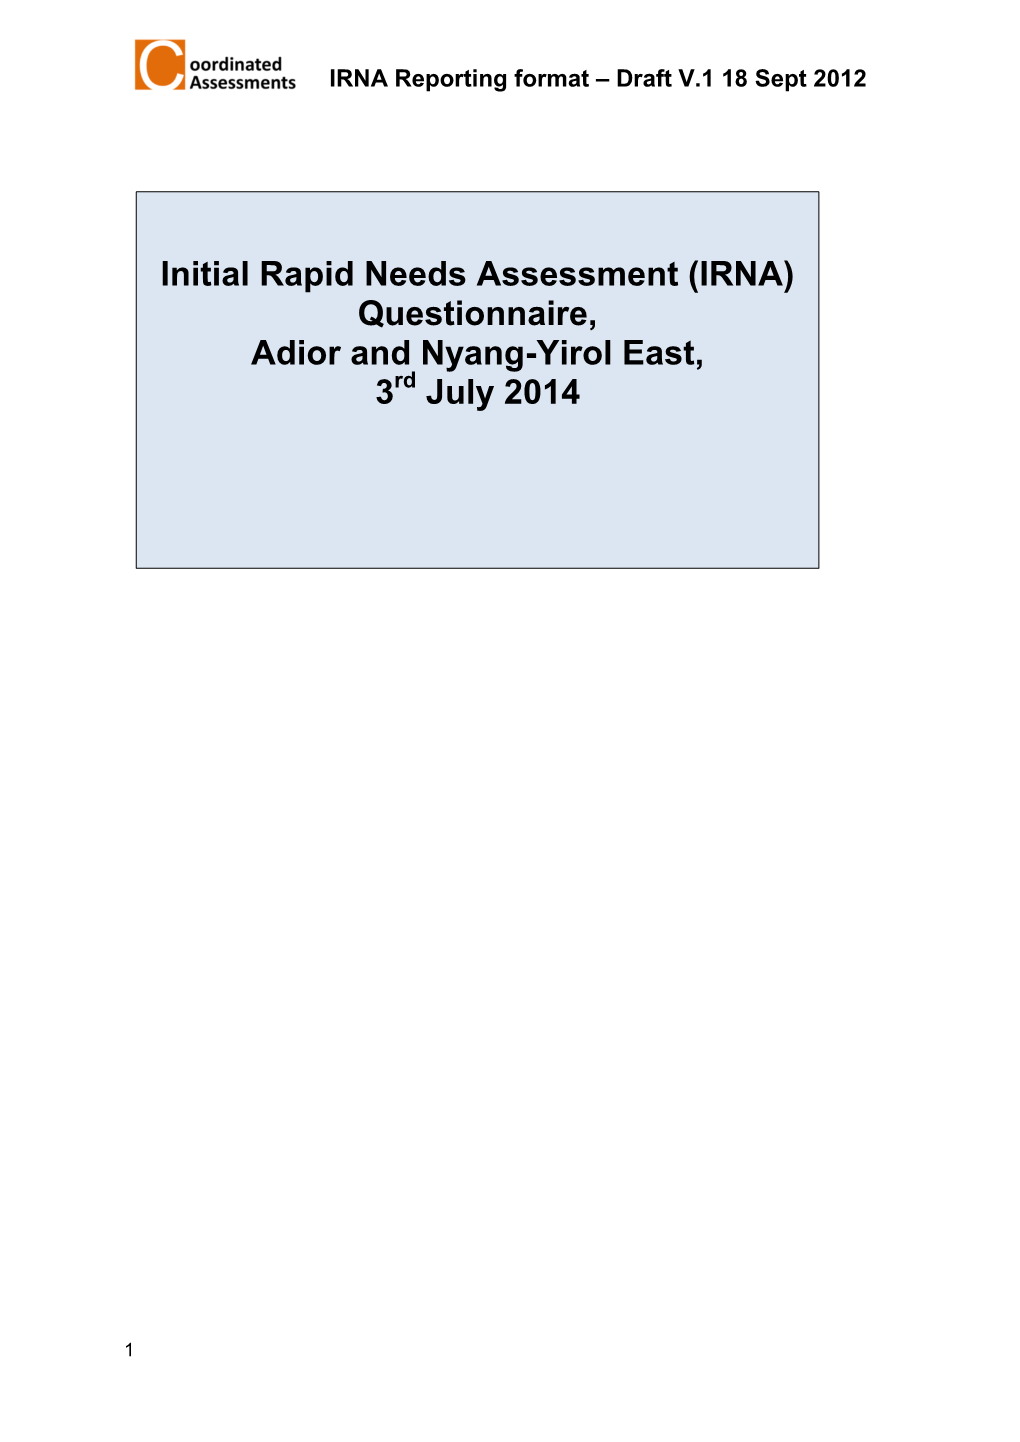 Initial Rapid Needs Assessment (IRNA) Questionnaire, Adior and Nyang-Yirol East, 3 July 2014